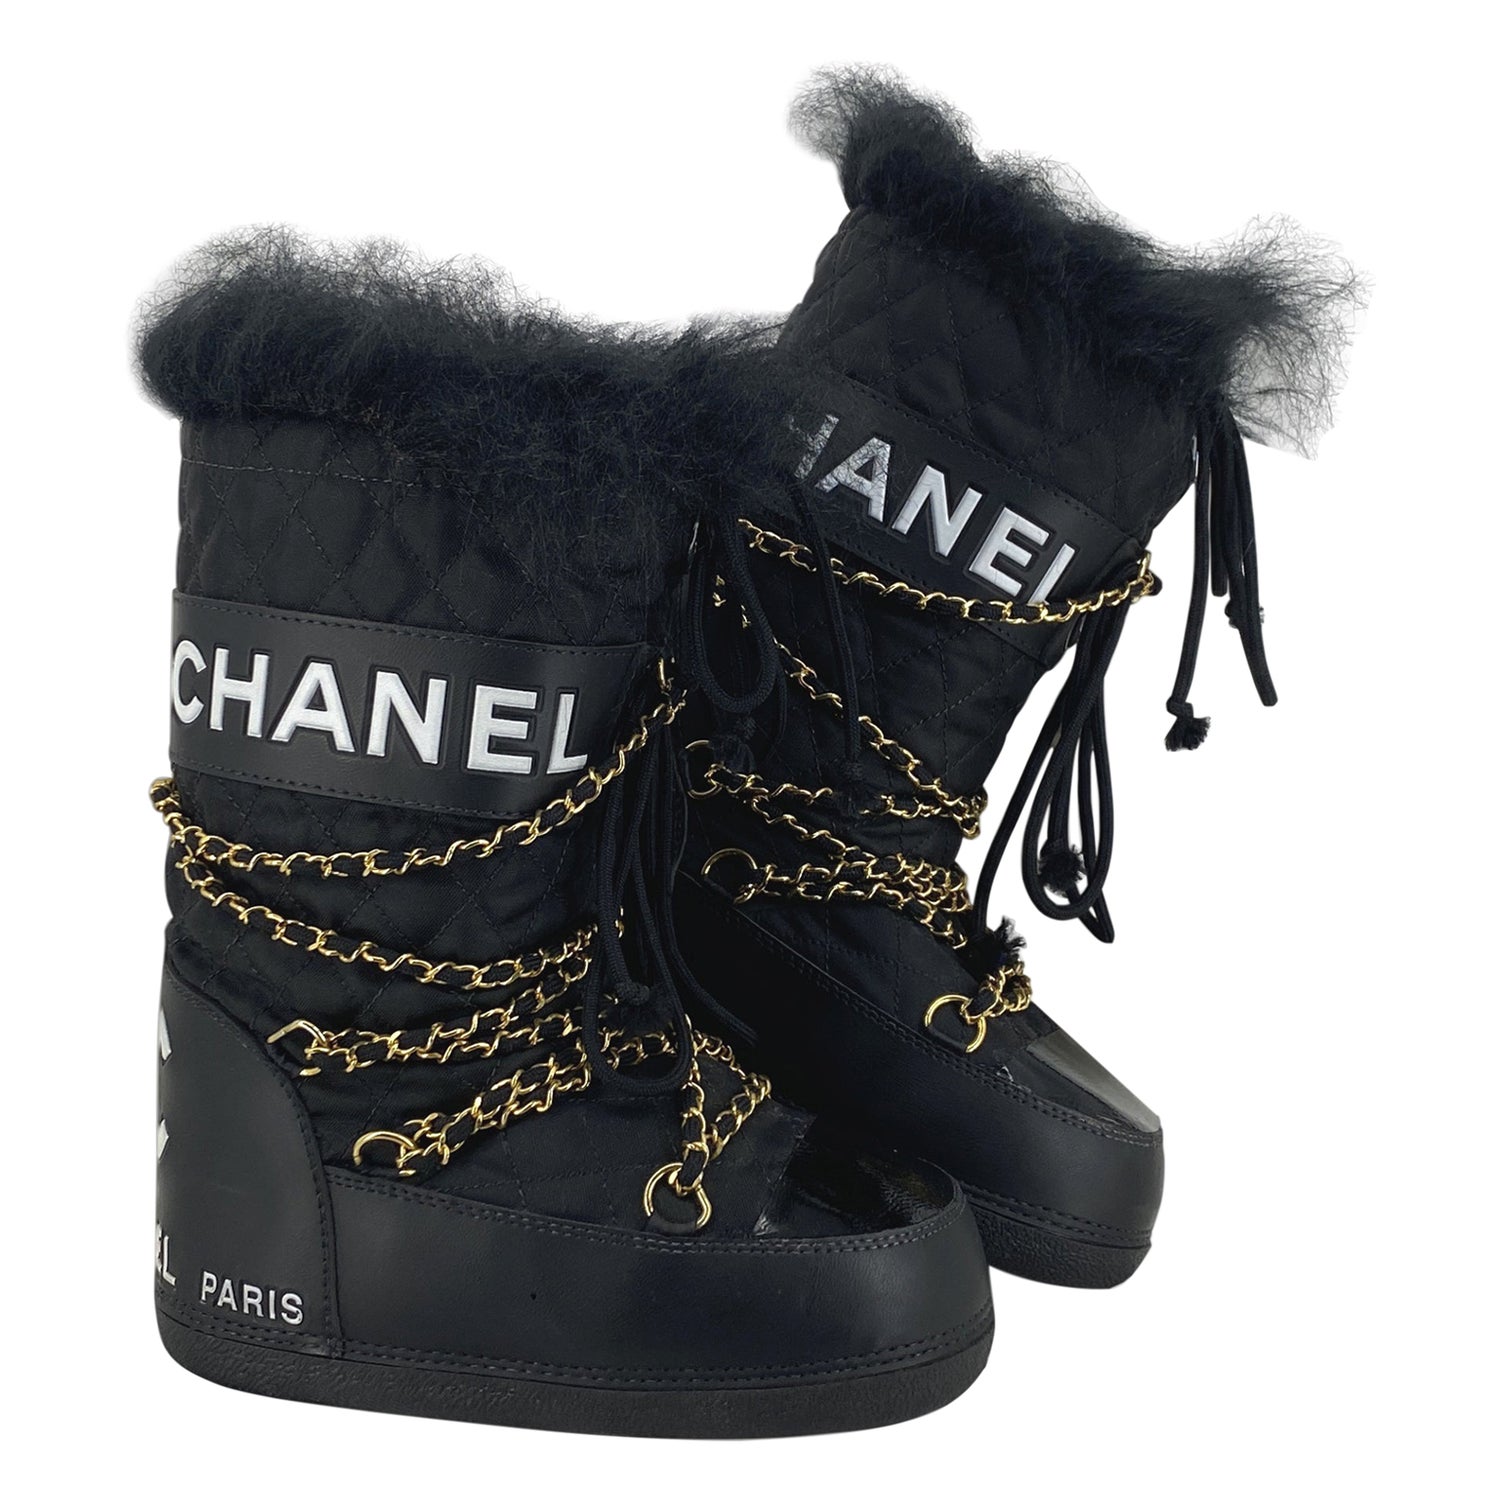 Chanel Rare Iconic 1990’s Vintage Moon Boots sz 41-43